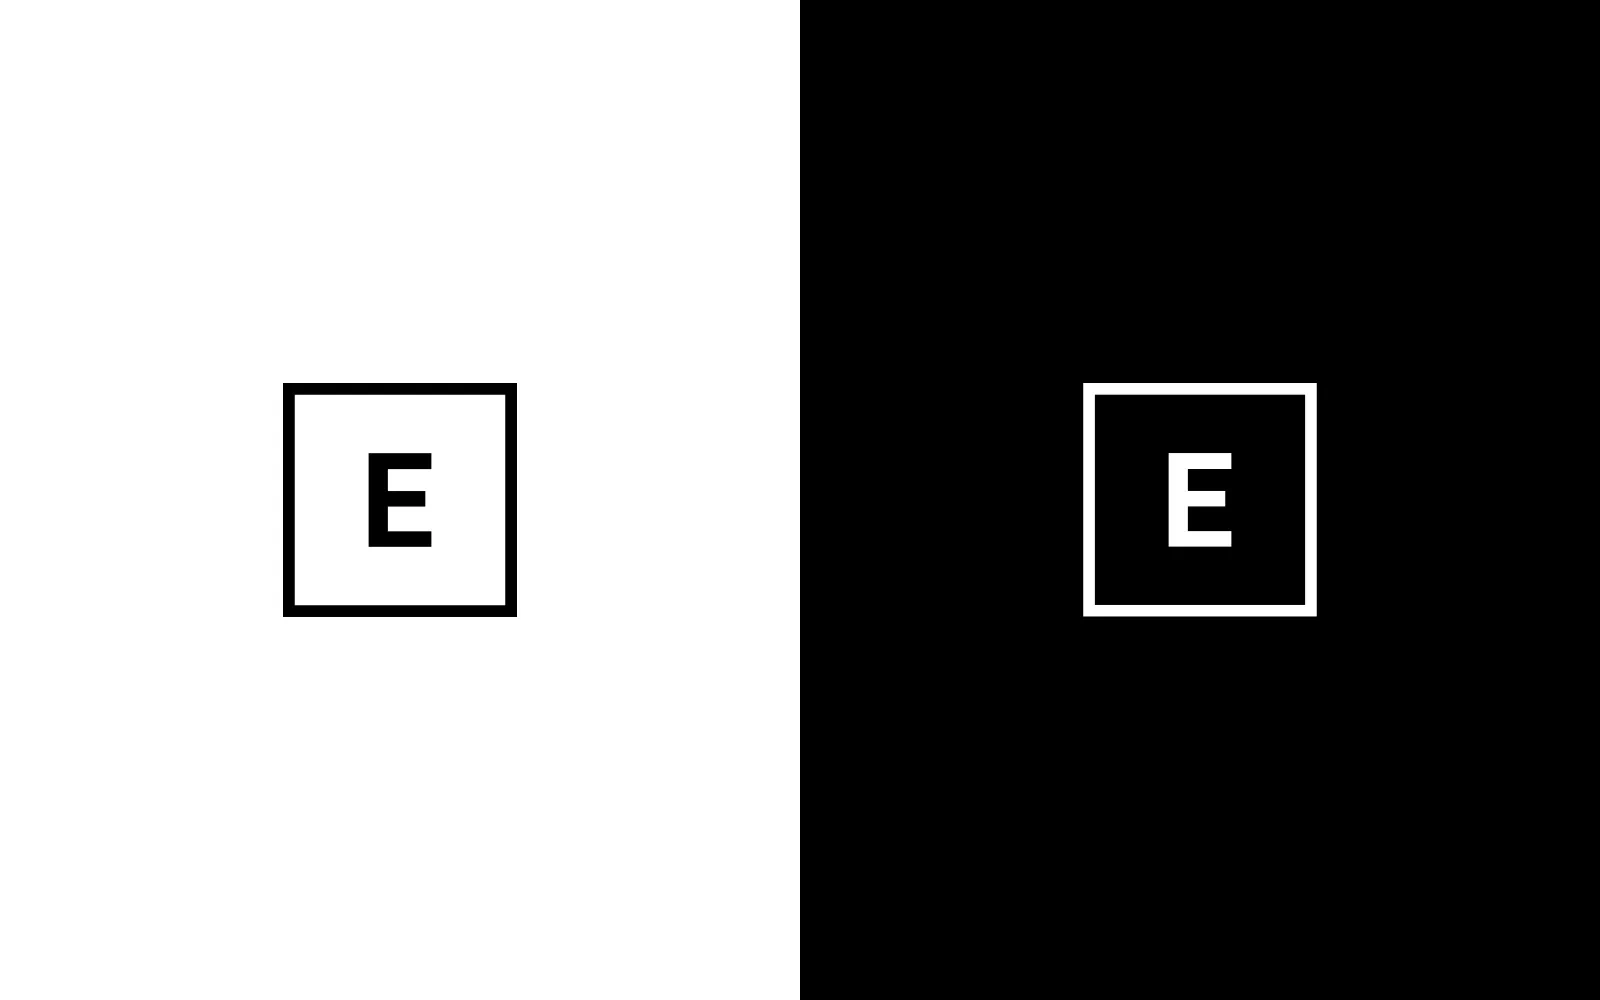 The Ed Bartholomew logo split into two versions, one with the logo black on a white background, the other is white on a black background